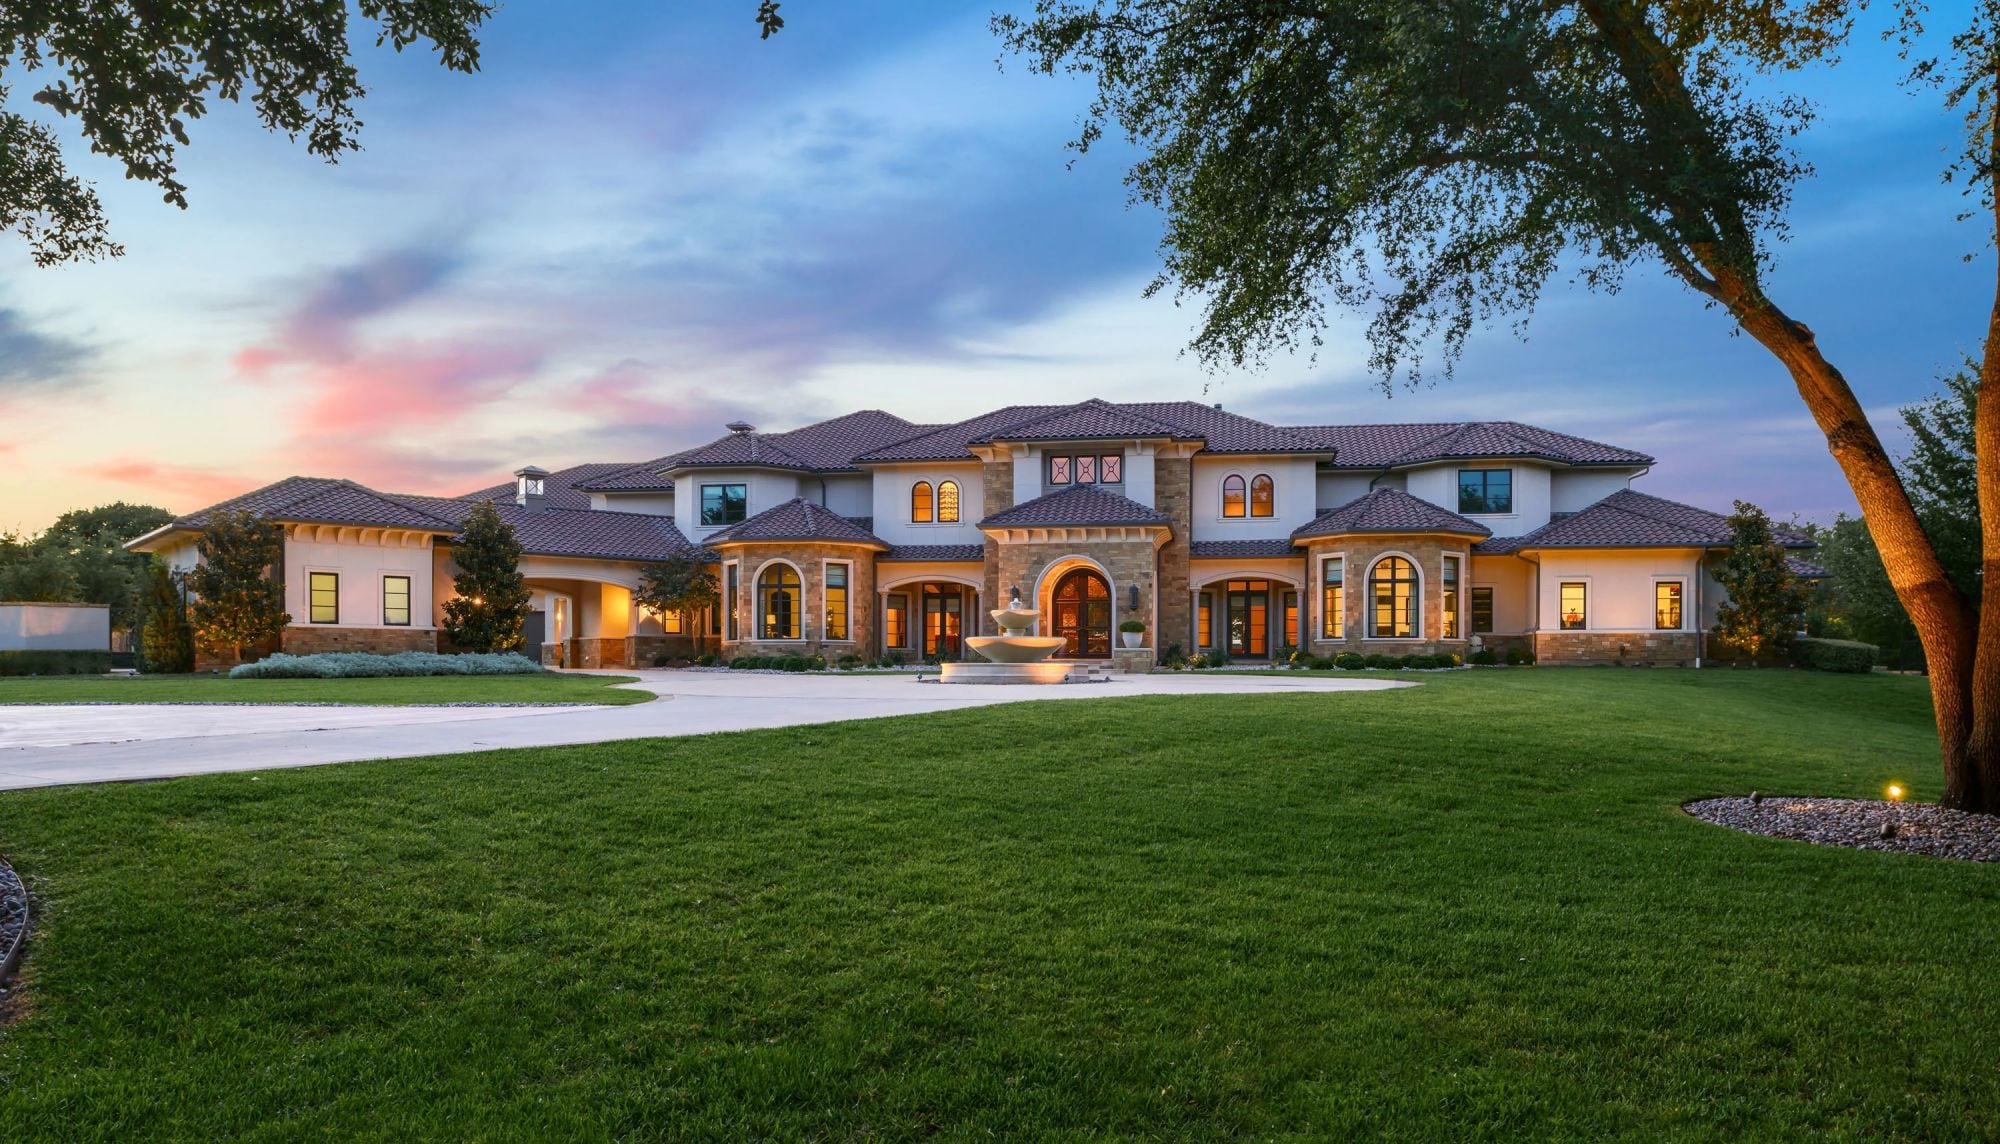 Former NBA Star Jermaine O'Neal's Southlake Mansion Drops in Price